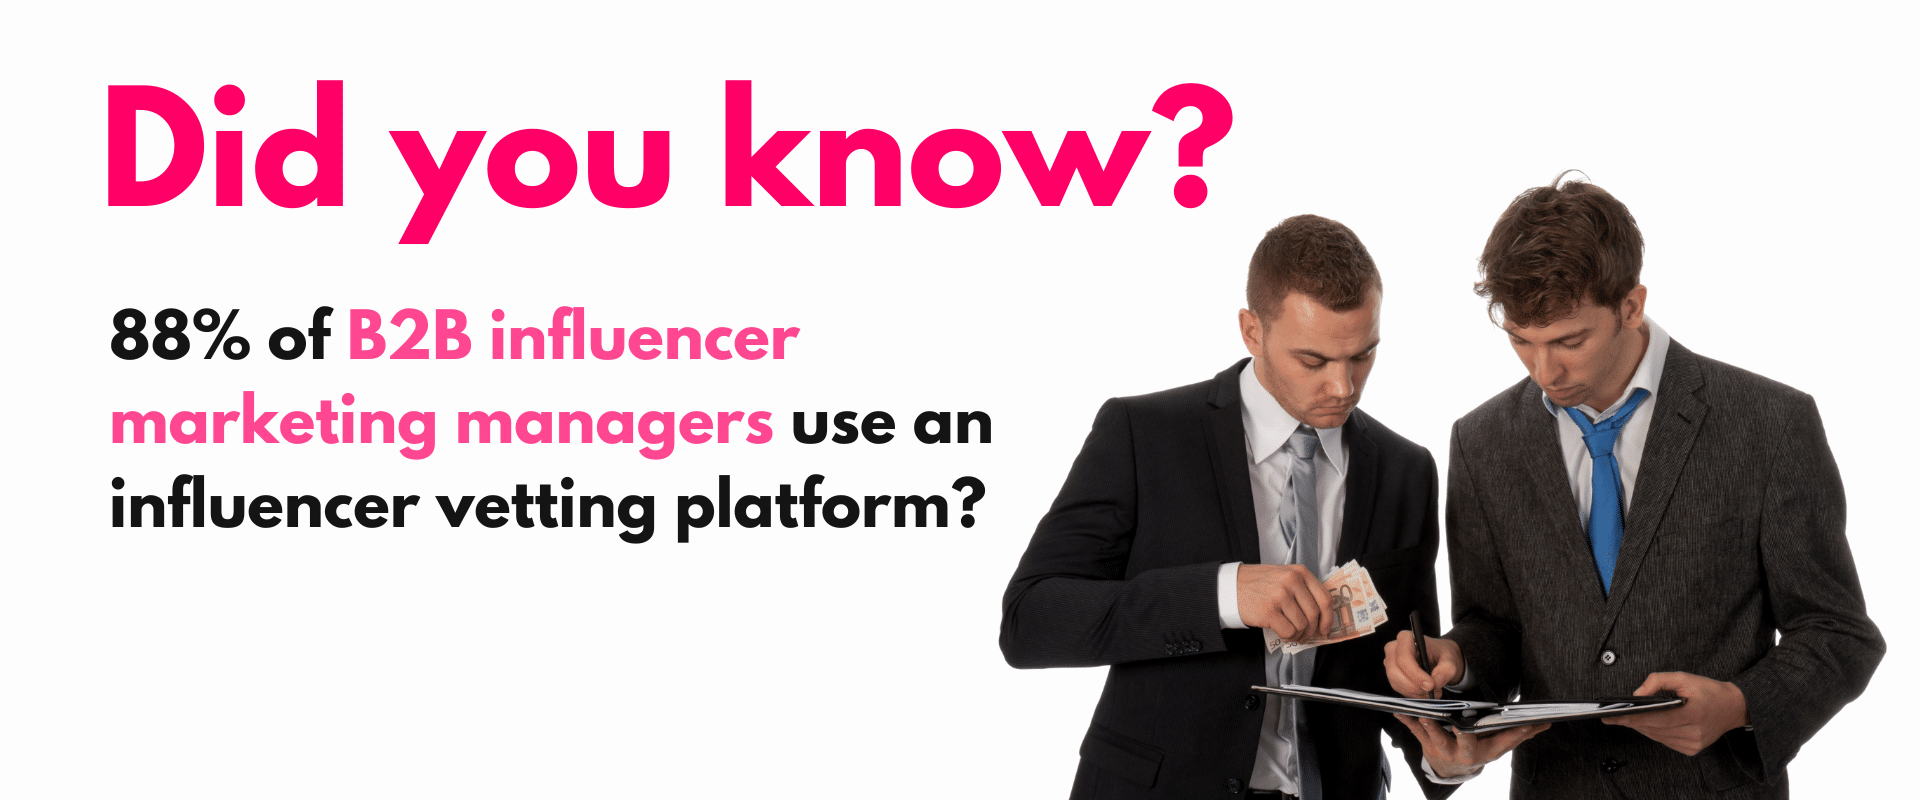 TrendHERO review: Did you know 80% of b2b marketers use influencer marketing platform?.